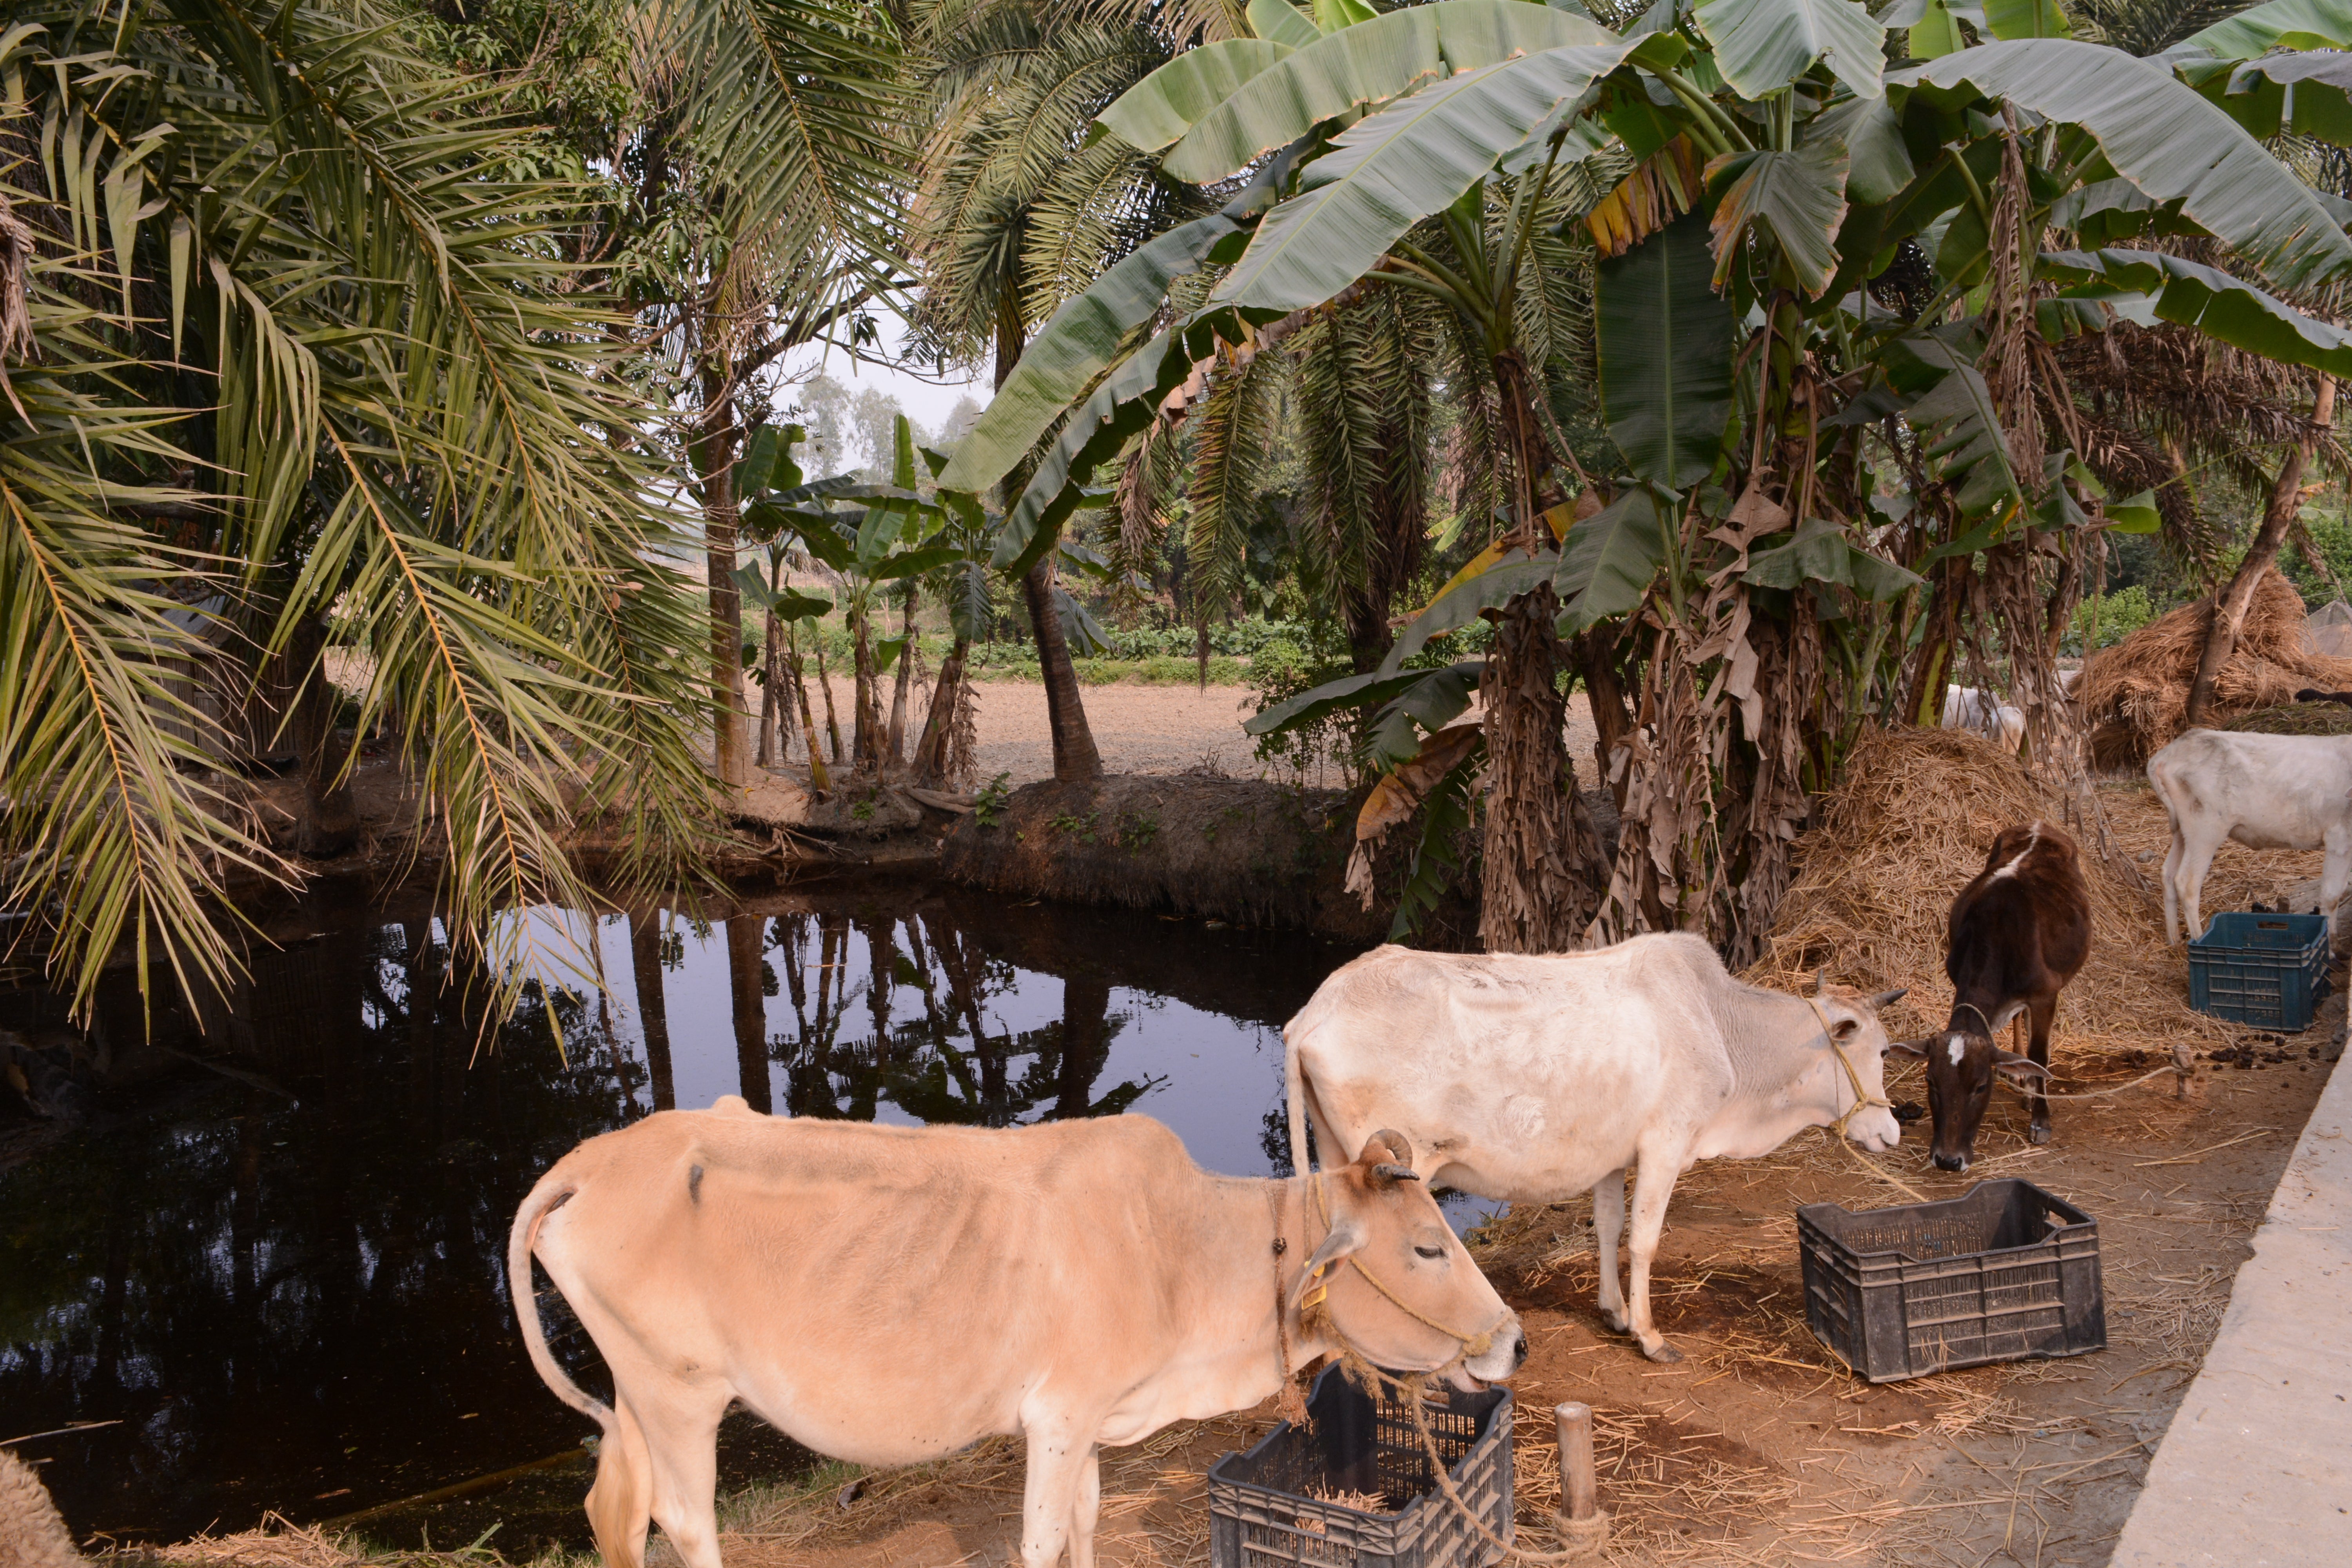 Locals in the Sundarbans are dependent on farming and poultry for their livelihood